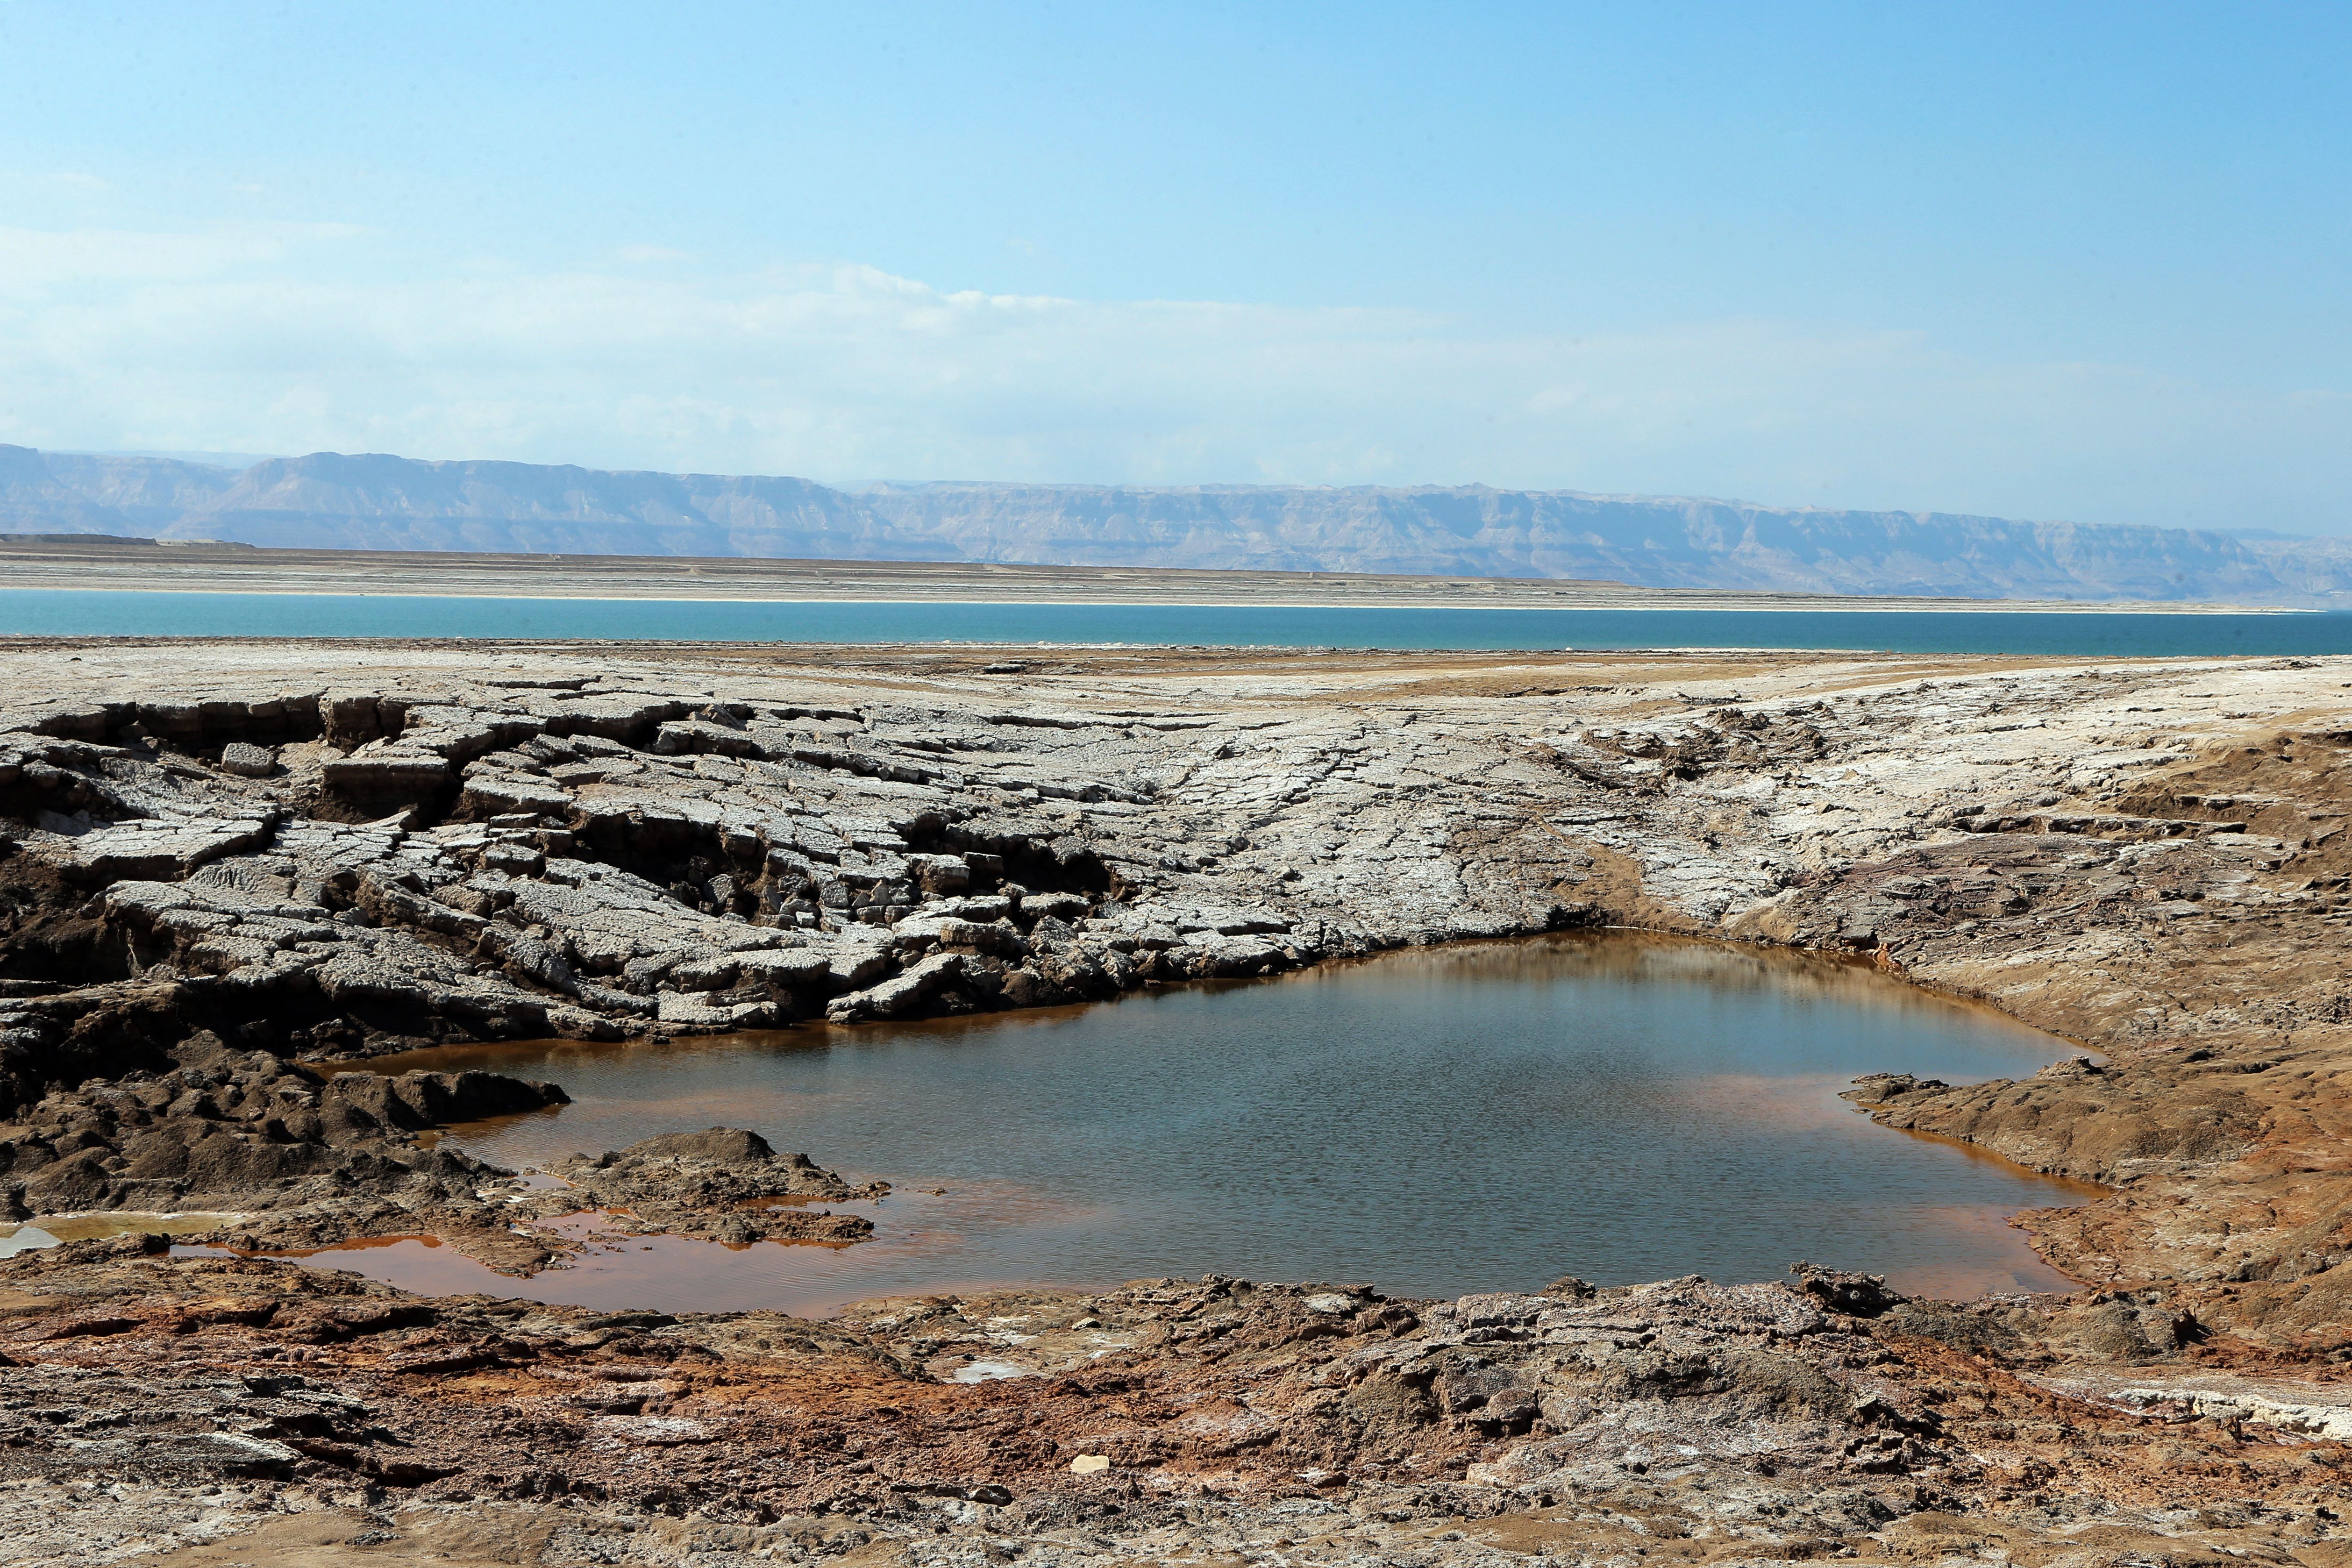 File image: Officials from Jordan point out that the pond where the water turned red is isolated from the waters of the Dead Sea and small in size